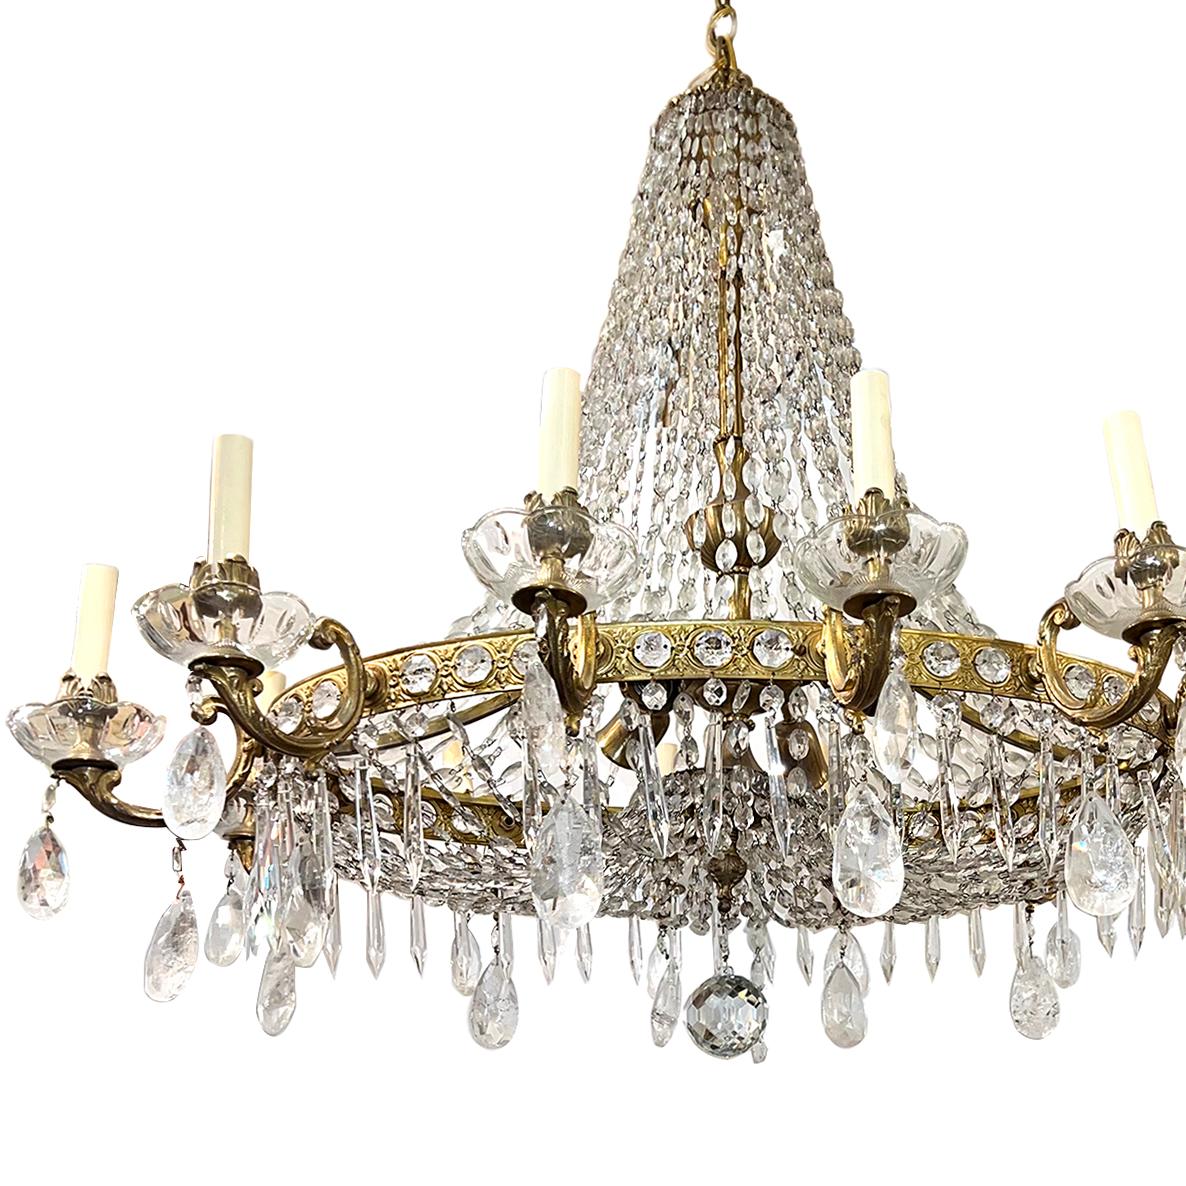 An oval circa 1920 French gilt bronze and rock crystal neoclassic style chandelier. 

Measurements: 
Height: 39 in. (adjustable drop)
Depth: 30 in.
Width/length: 38 in.